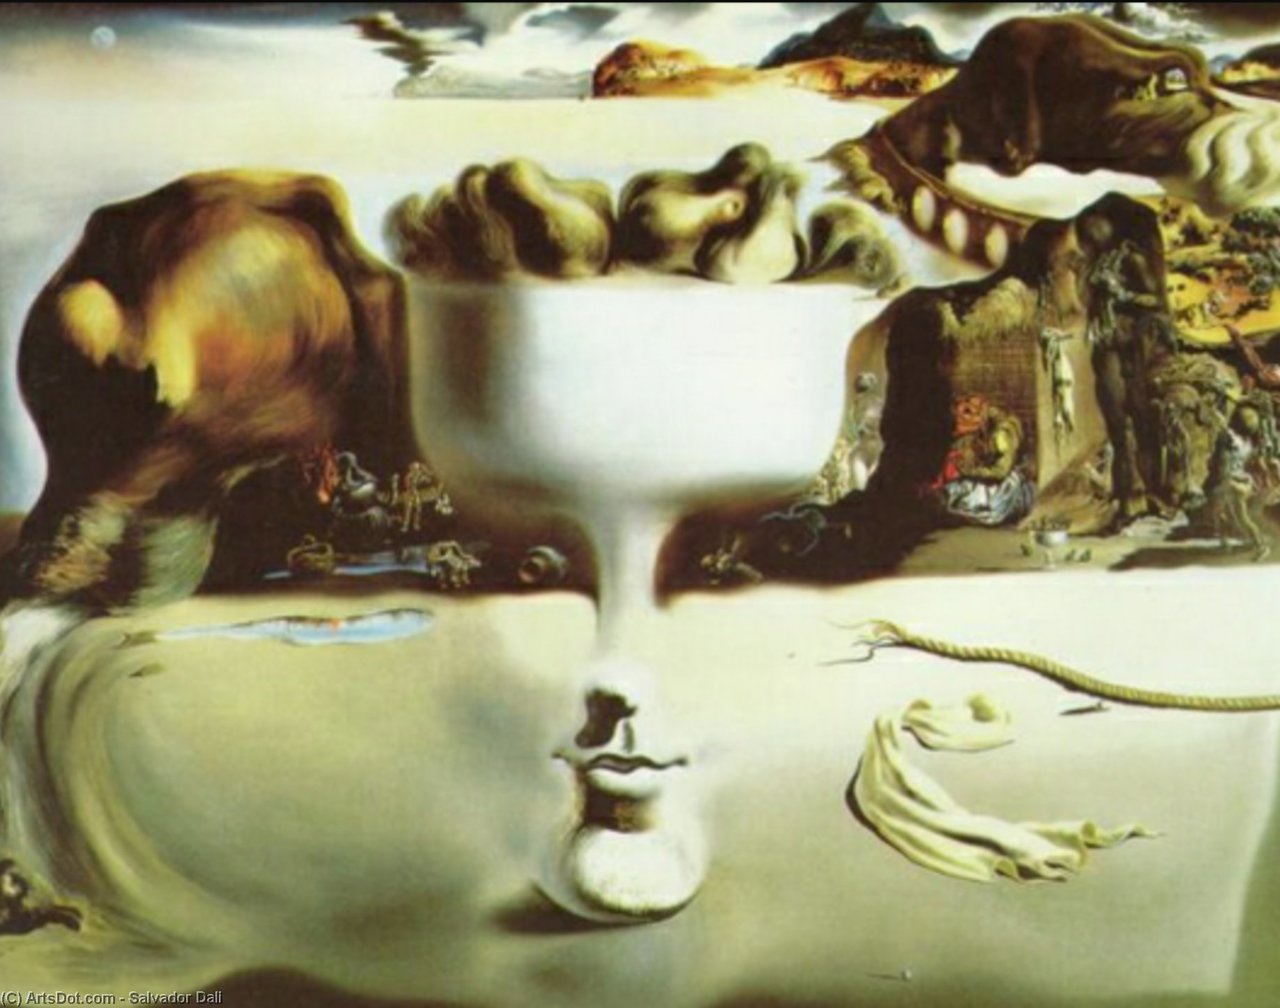 Apparition of Face and Fruit Dish on a Beach by Salvador DalÃ­, 1938